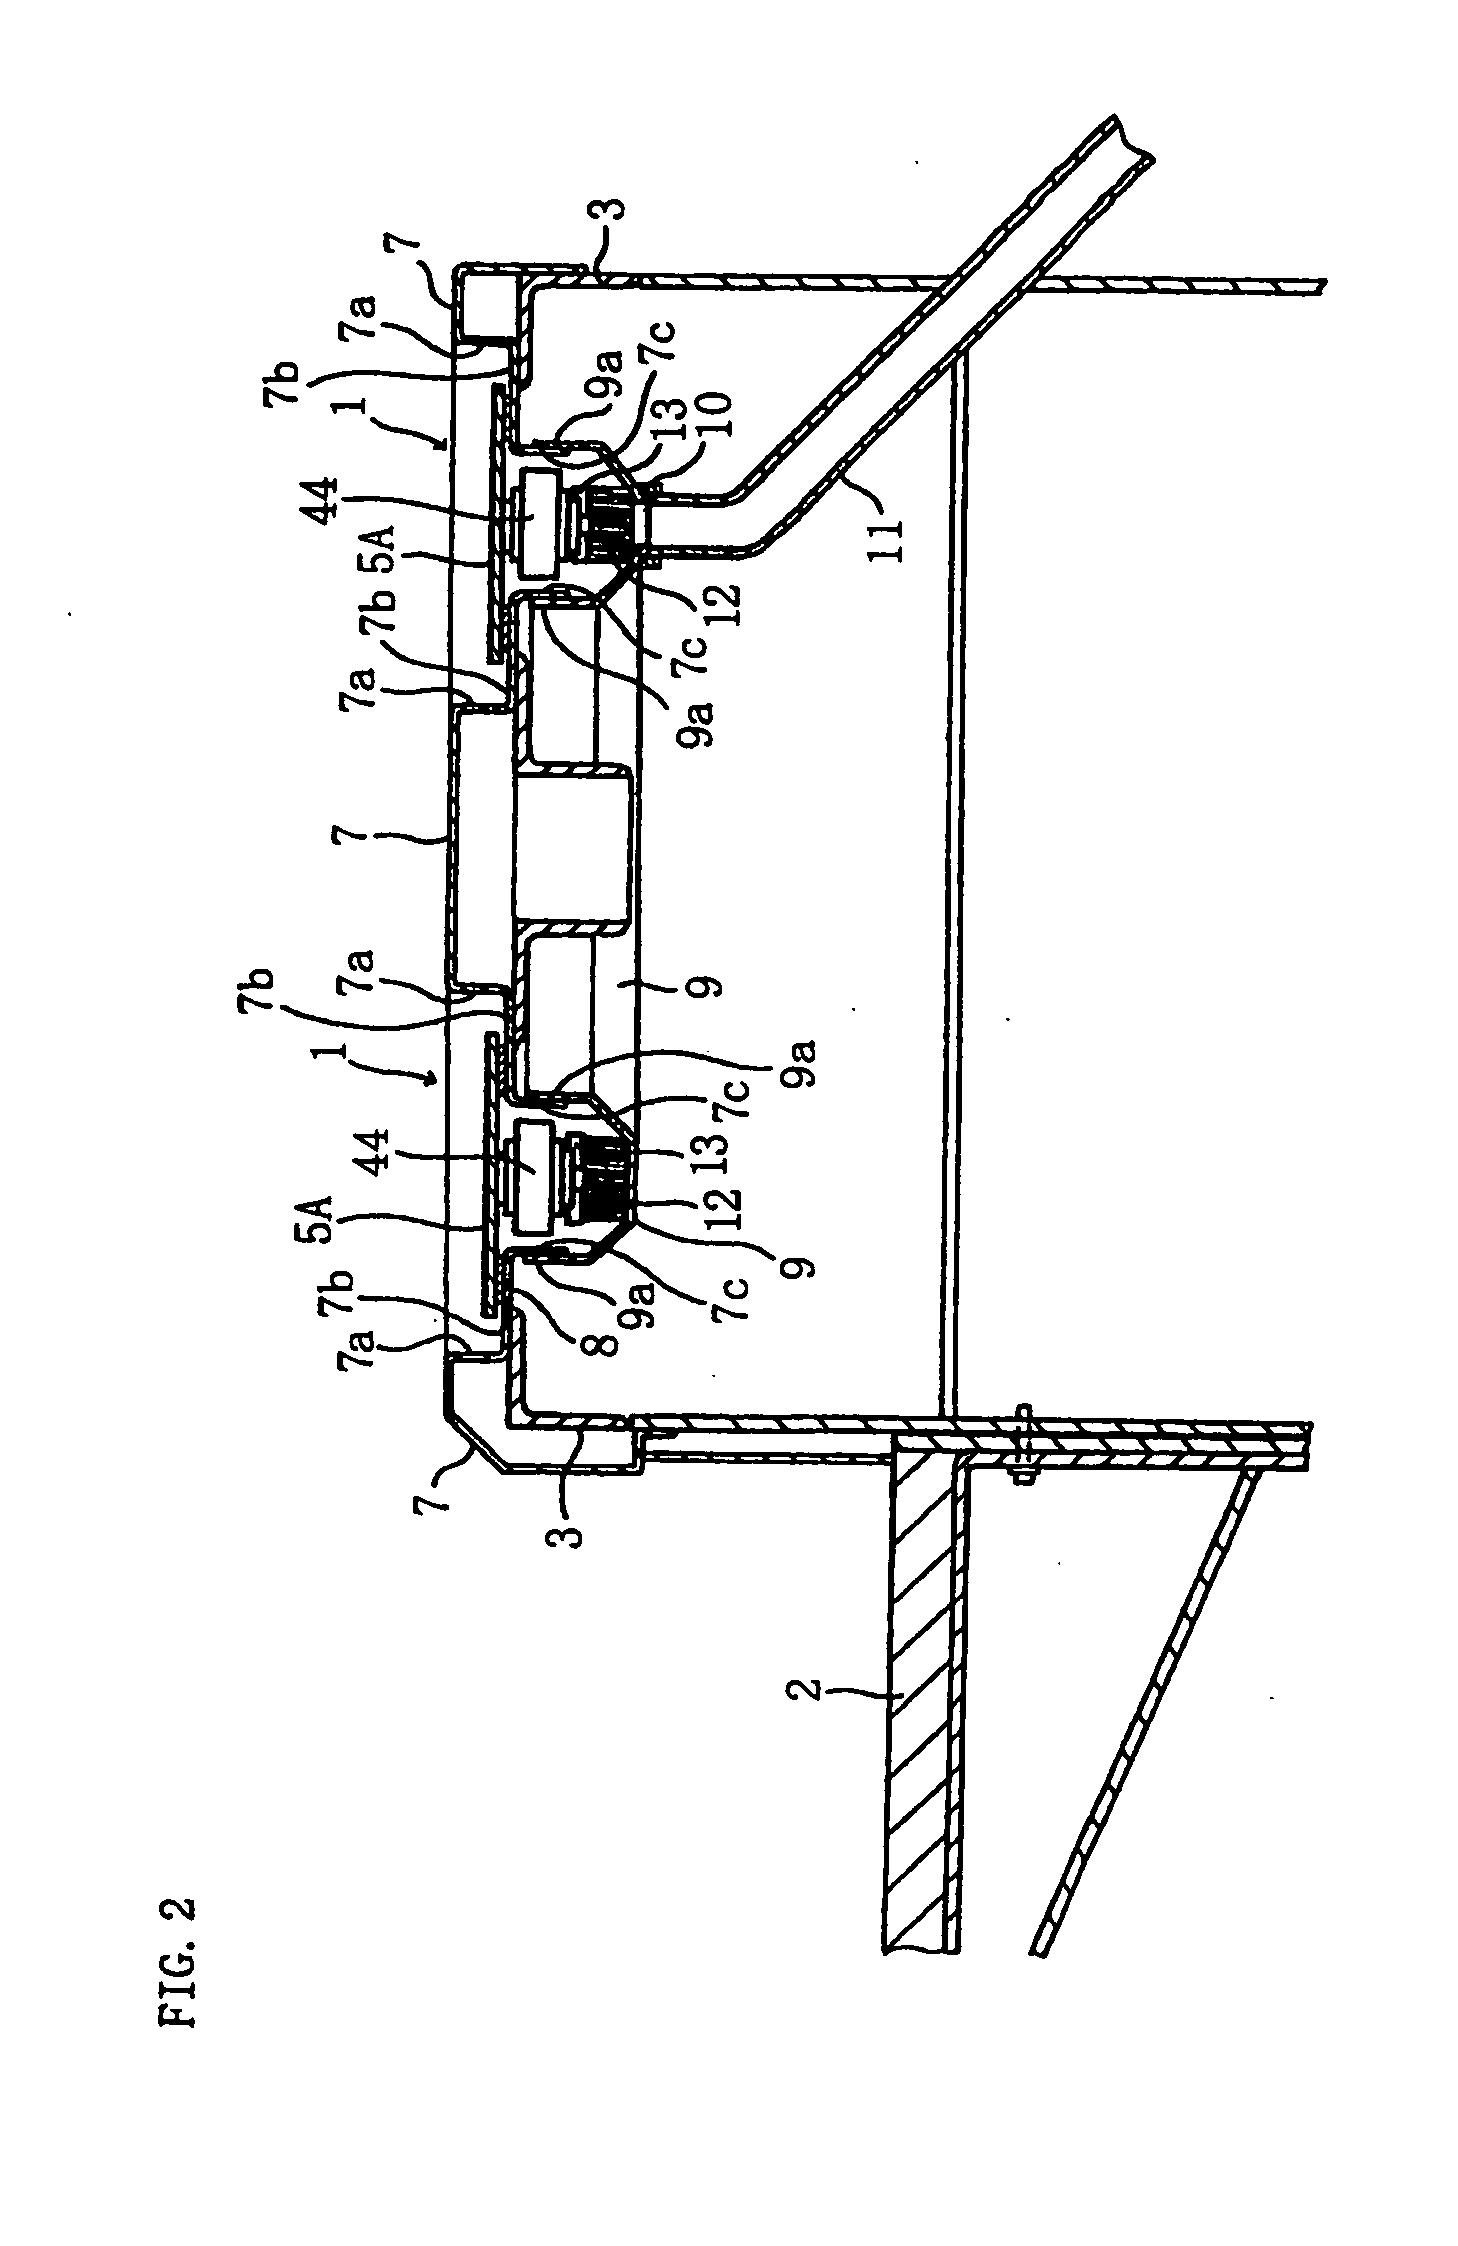 Circulating type food and drink transport apparatus